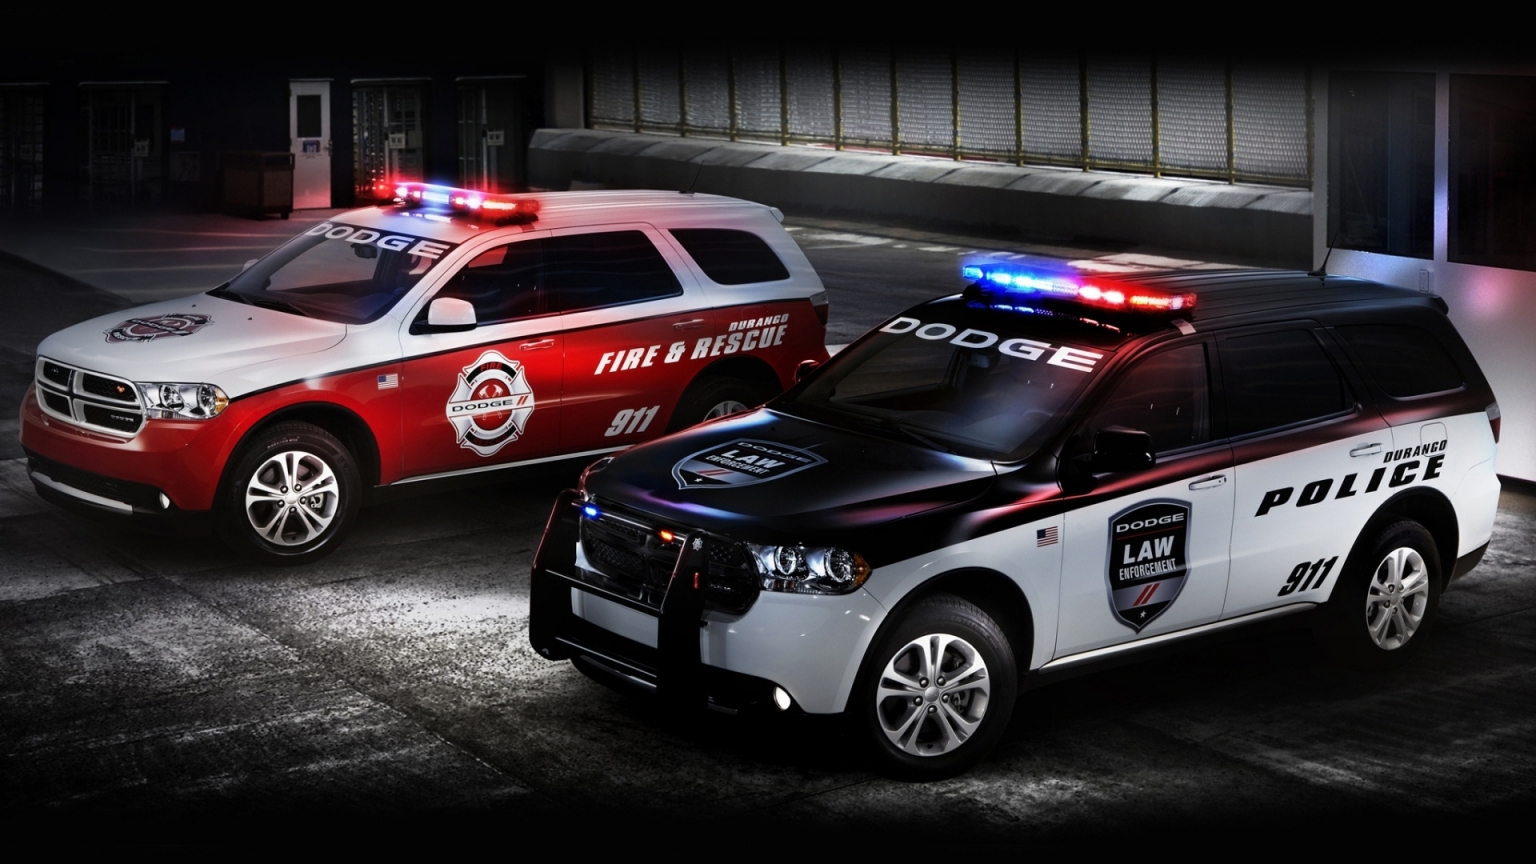 Dodge Police and Fire Cars for 1536 x 864 HDTV resolution